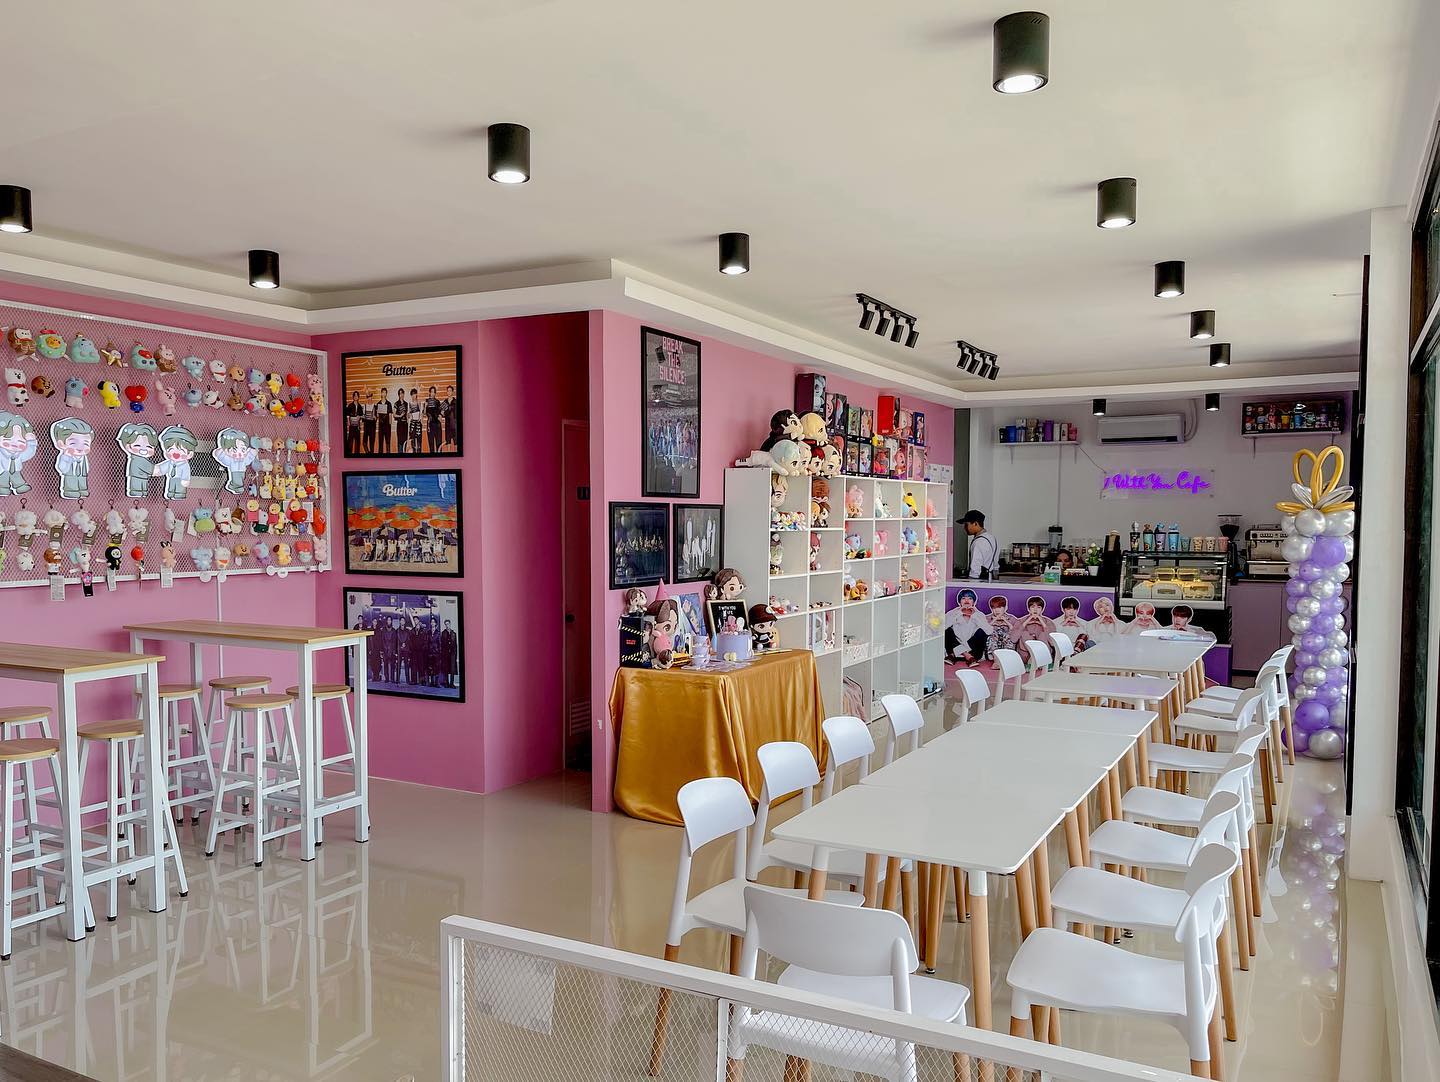 BTS-themed cafes - 7 With You Cafe 2